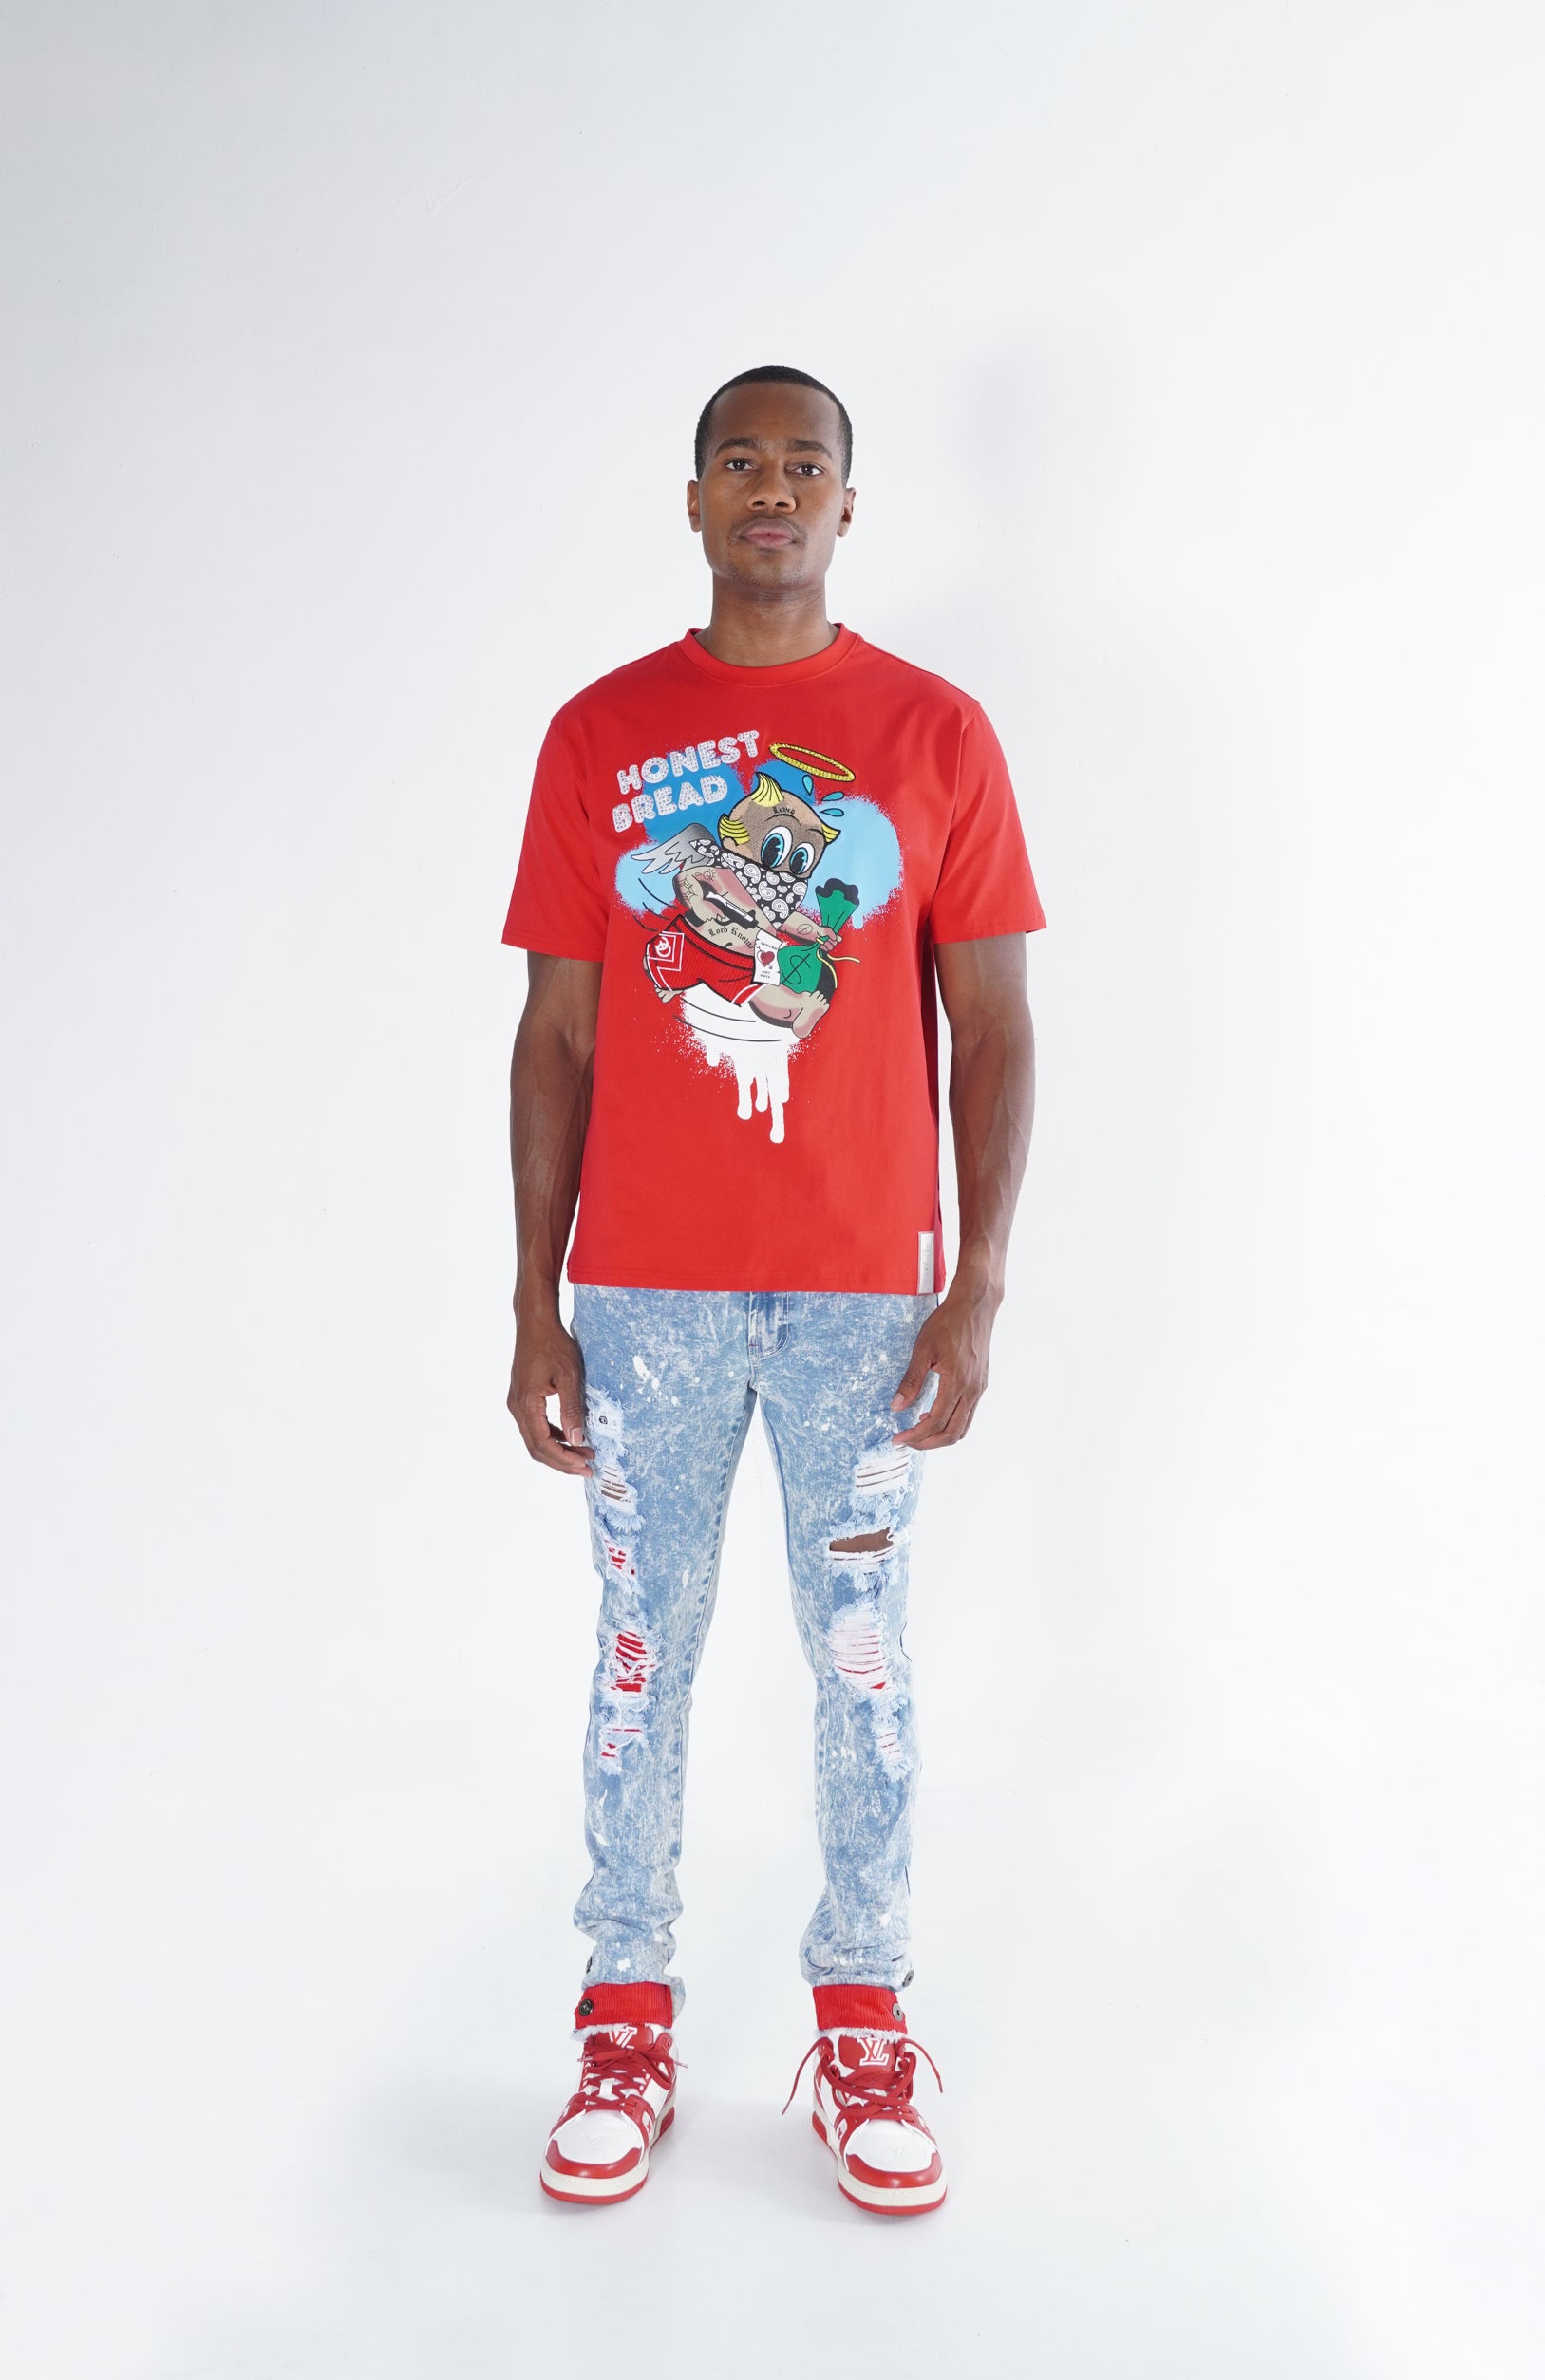 F144 Frost Honest Bread Tee - Red